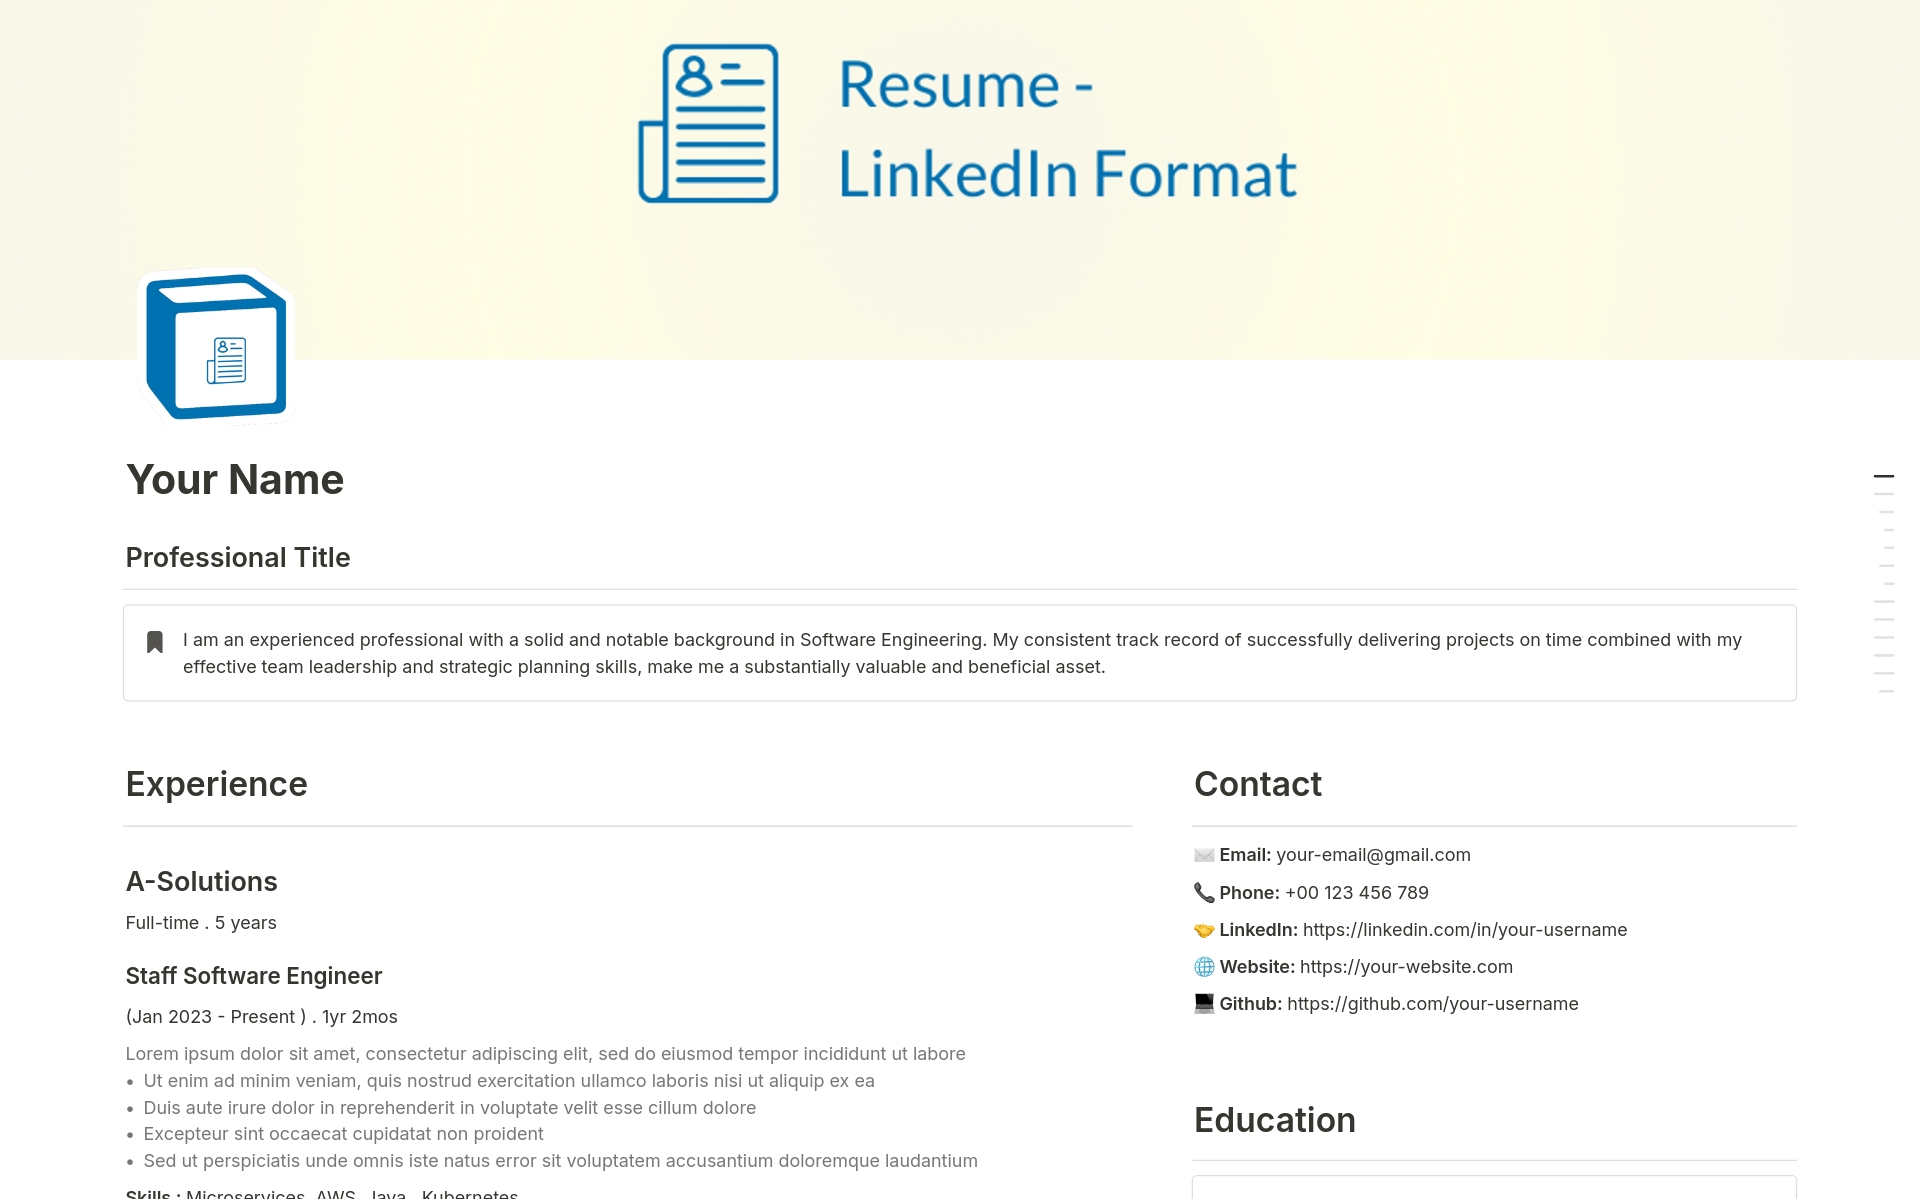 A template preview for Resume - LinkedIn Format